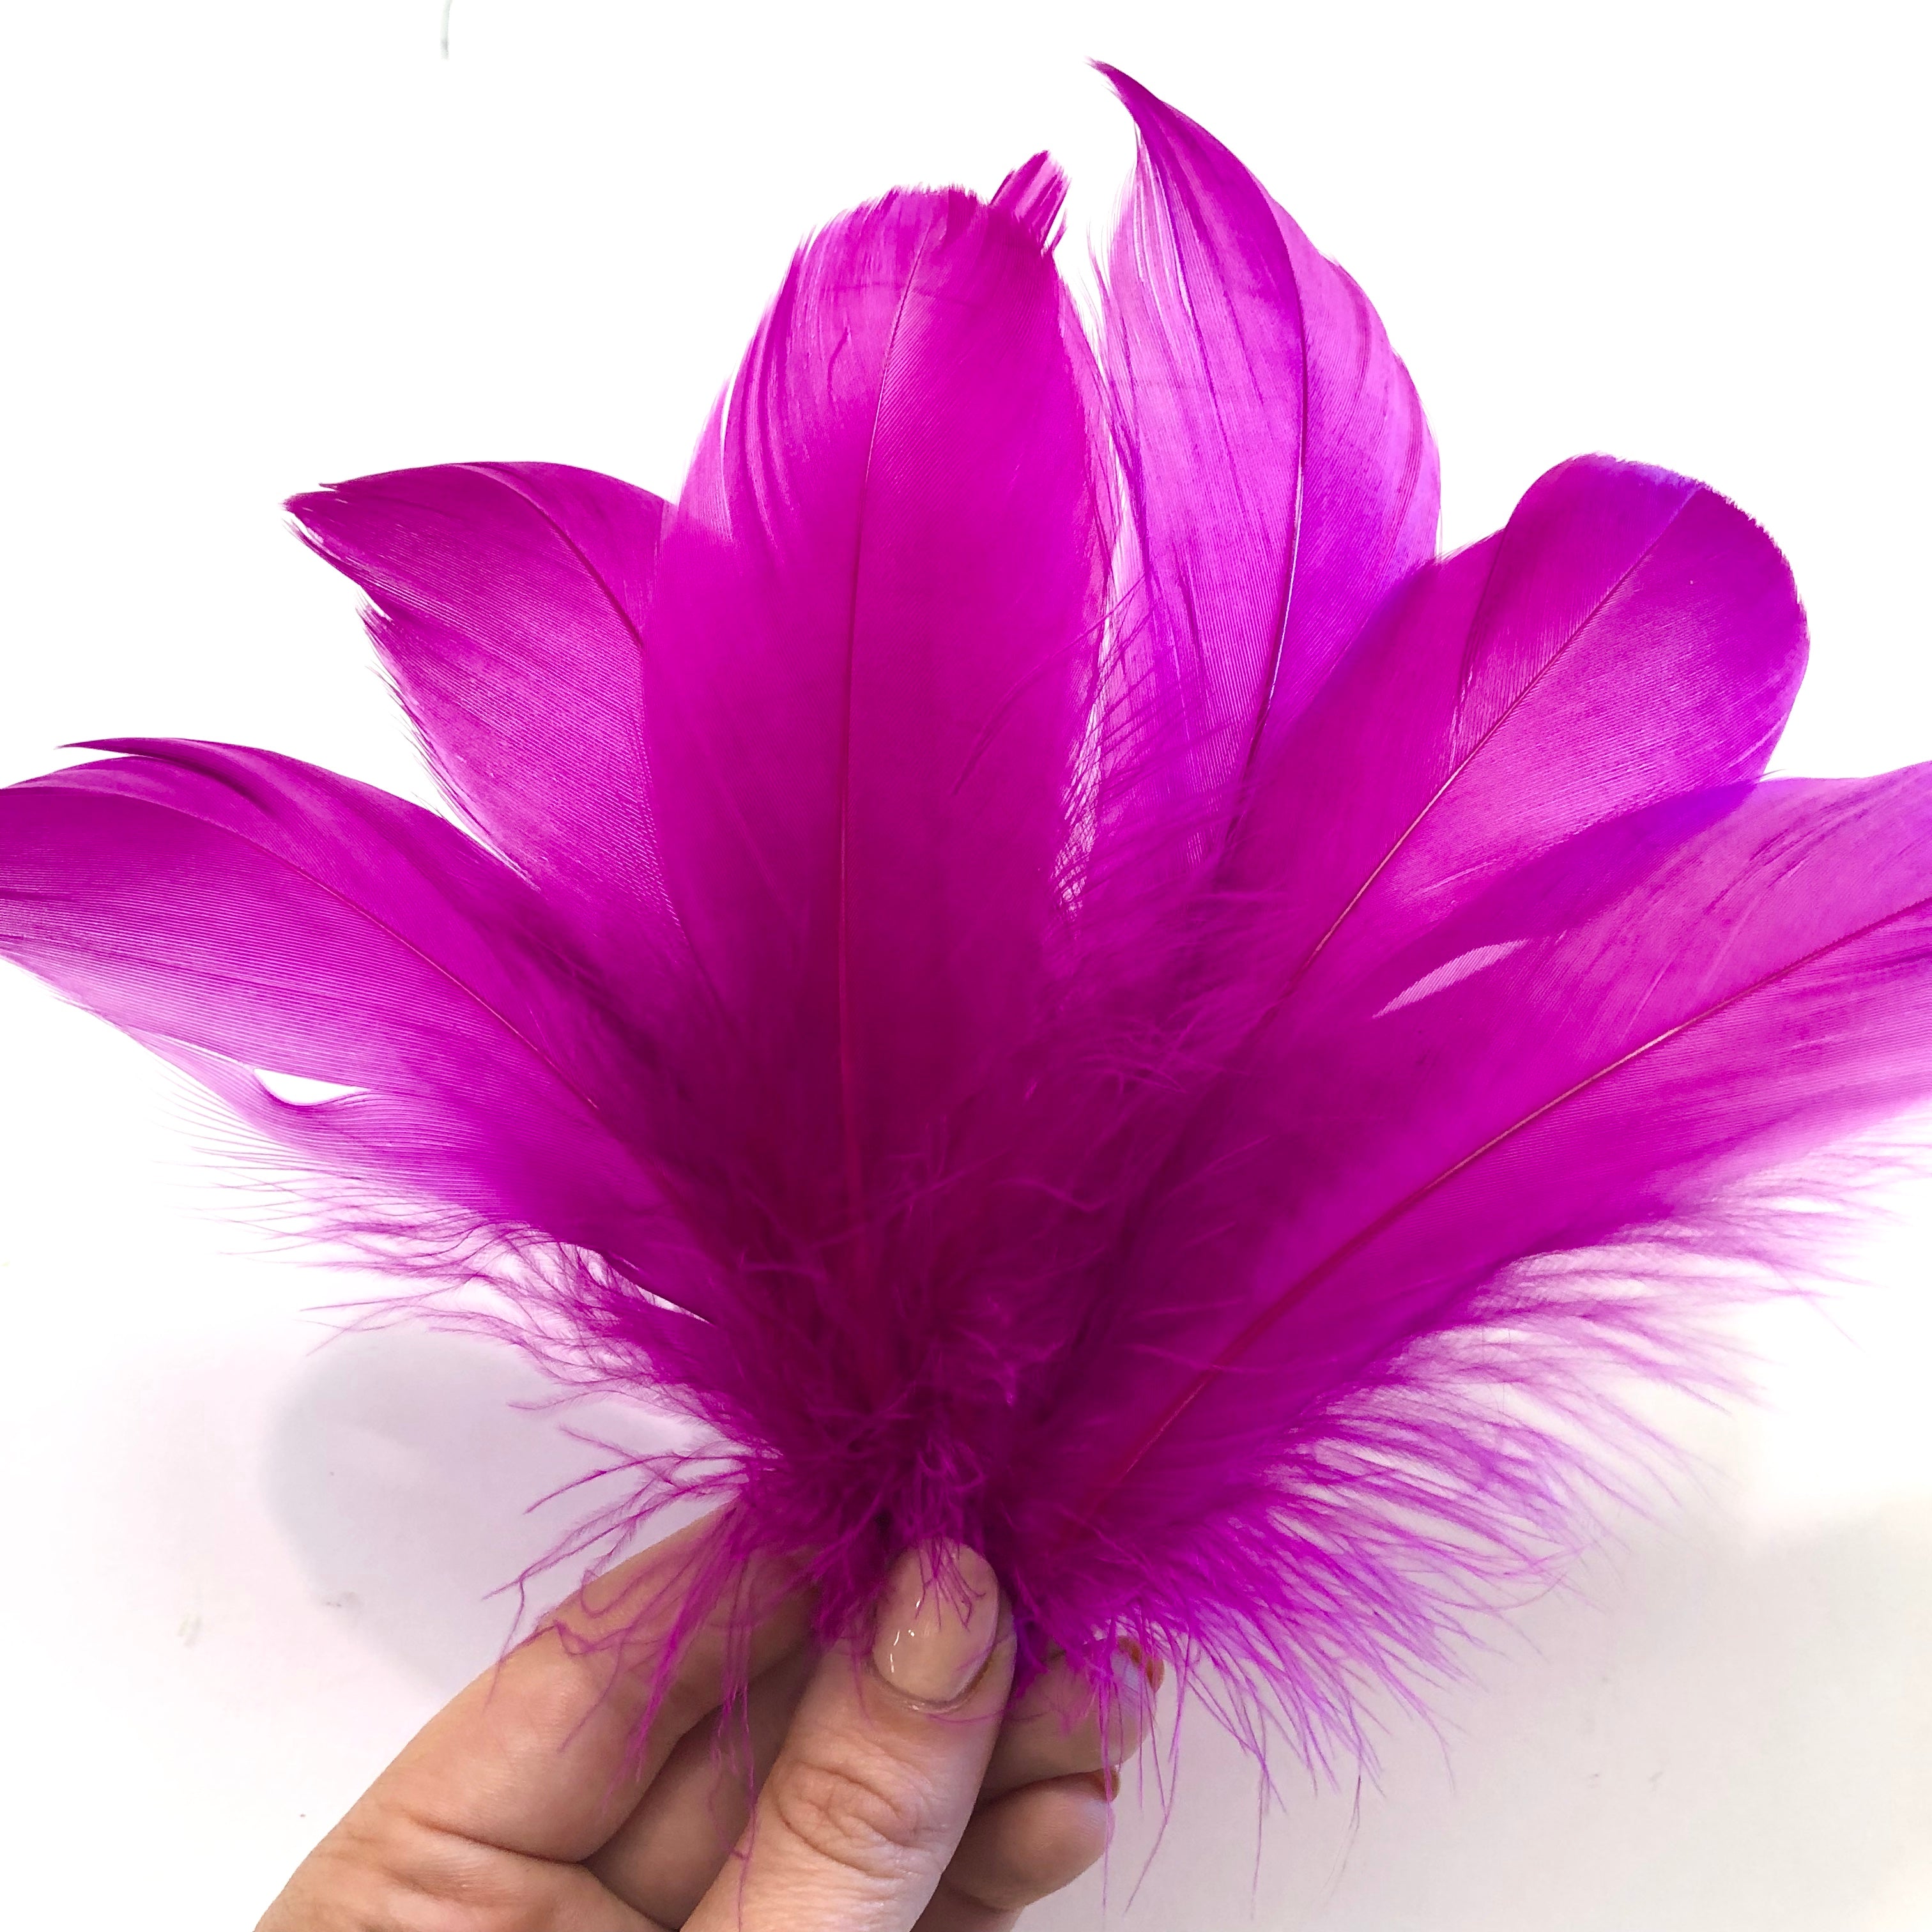 Goose Nagoire Feathers 10 grams - Magenta